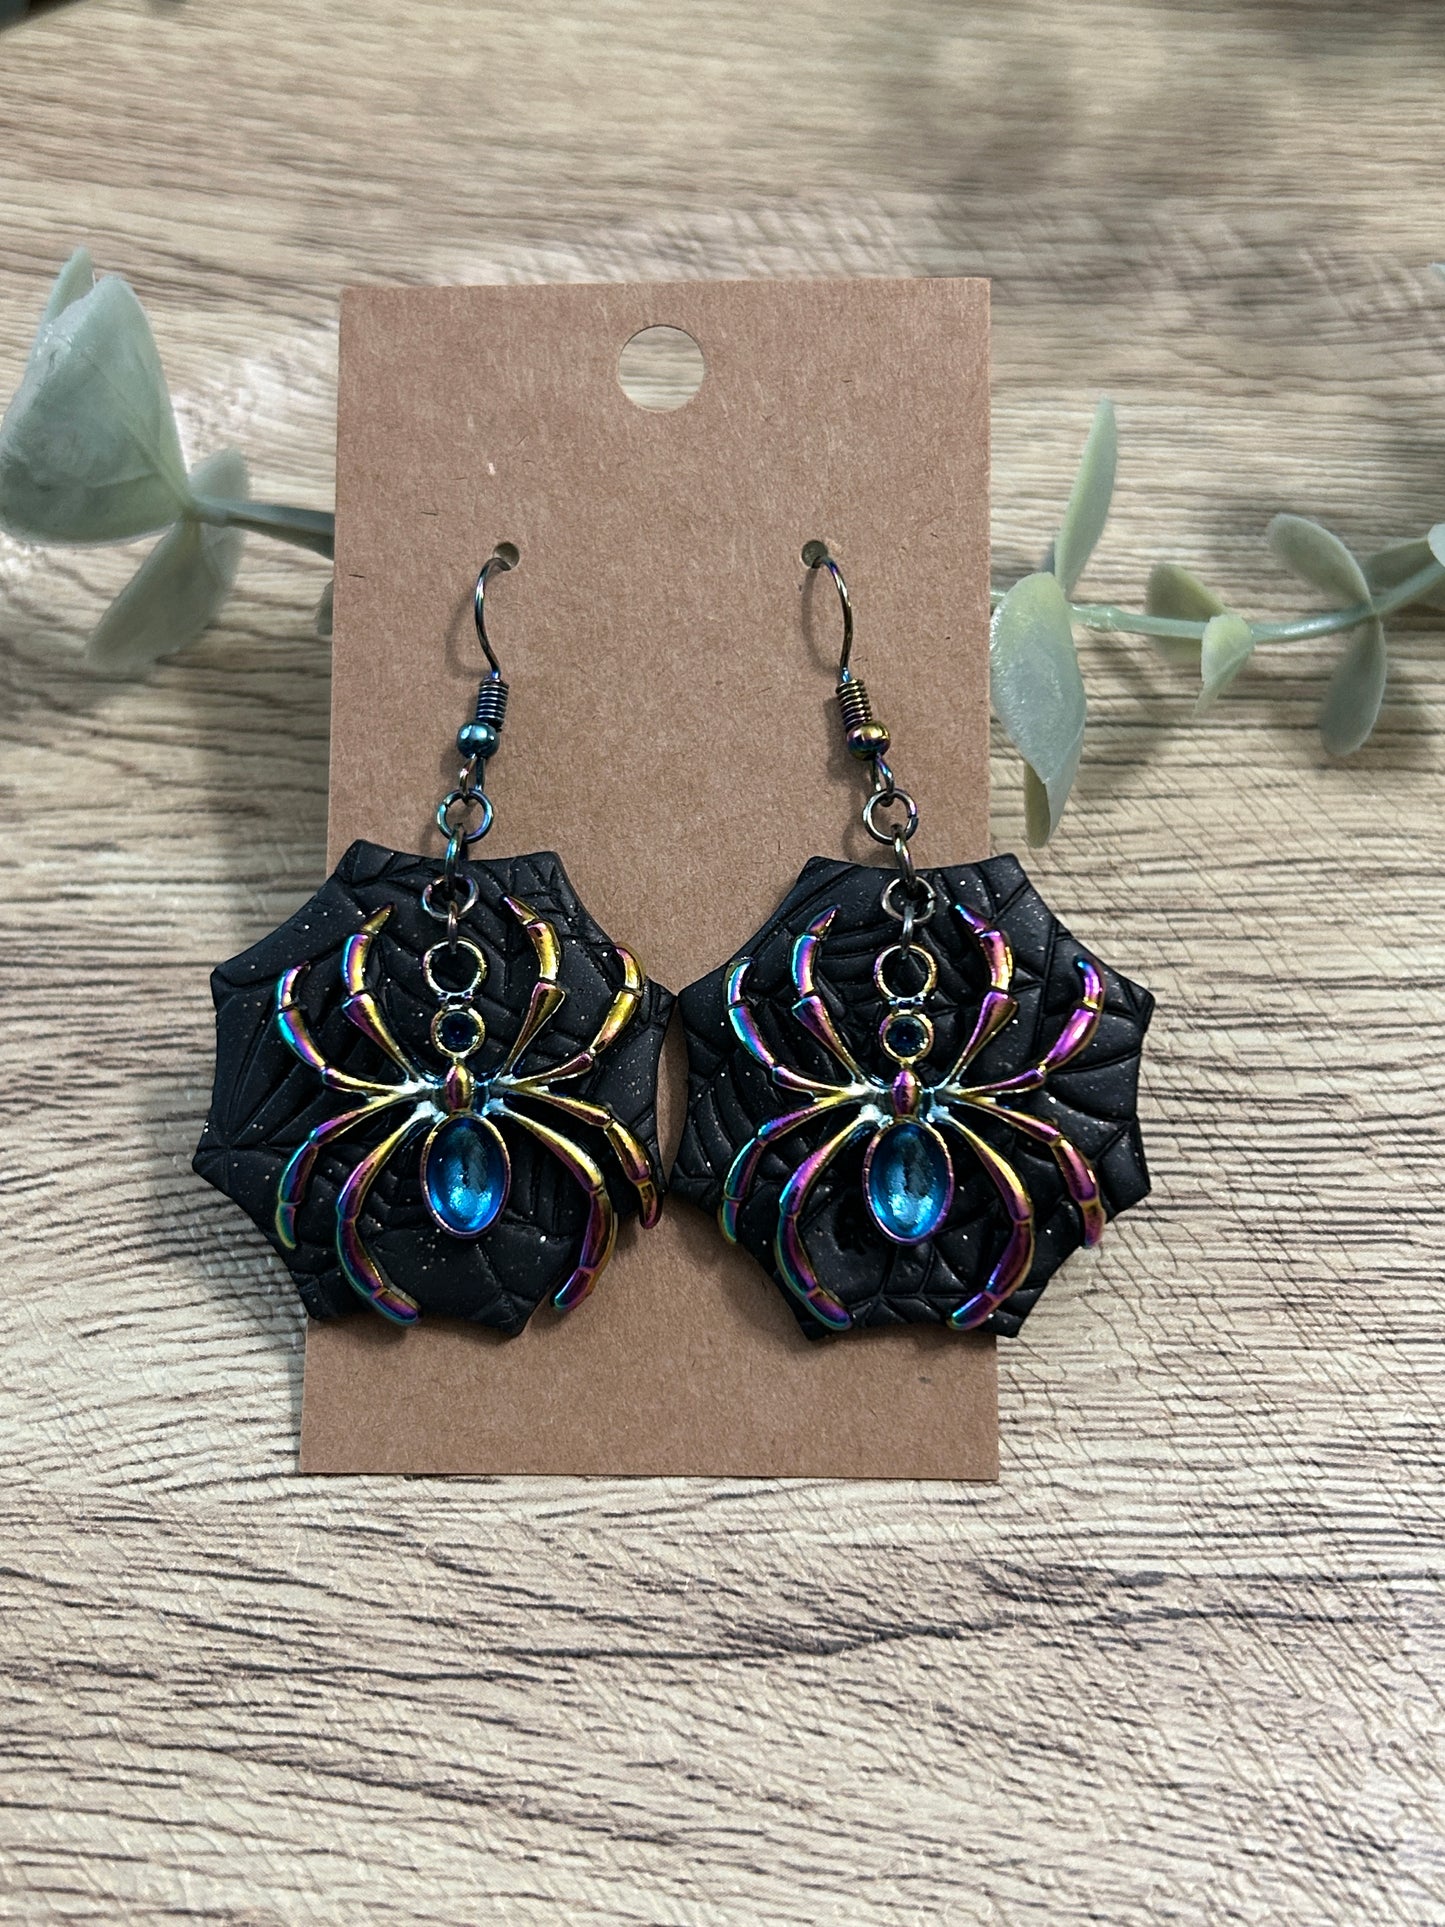 Black Rainbow Spider and Web Statement Dangle Earrings YOU CHOOSE From 4 Colors